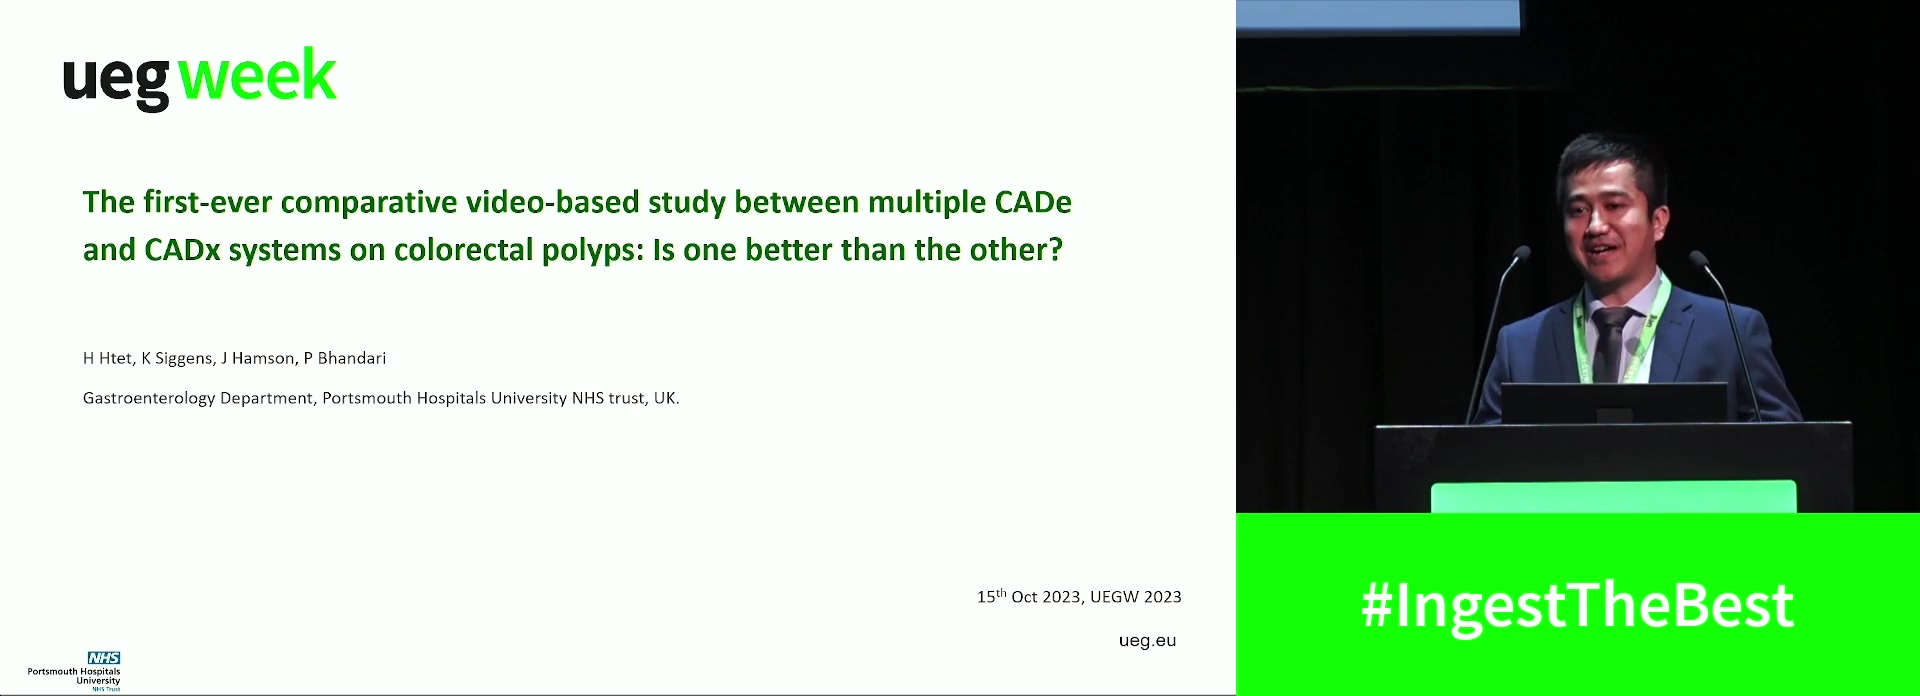 A FIRST EVER COMPARATIVE VIDEO-BASED STUDY BETWEEN MULTIPLE CADE AND CADX SYSTEMS ON COLORECTAL POLYPS: IS ONE BETTER THAN THE OTHERS?